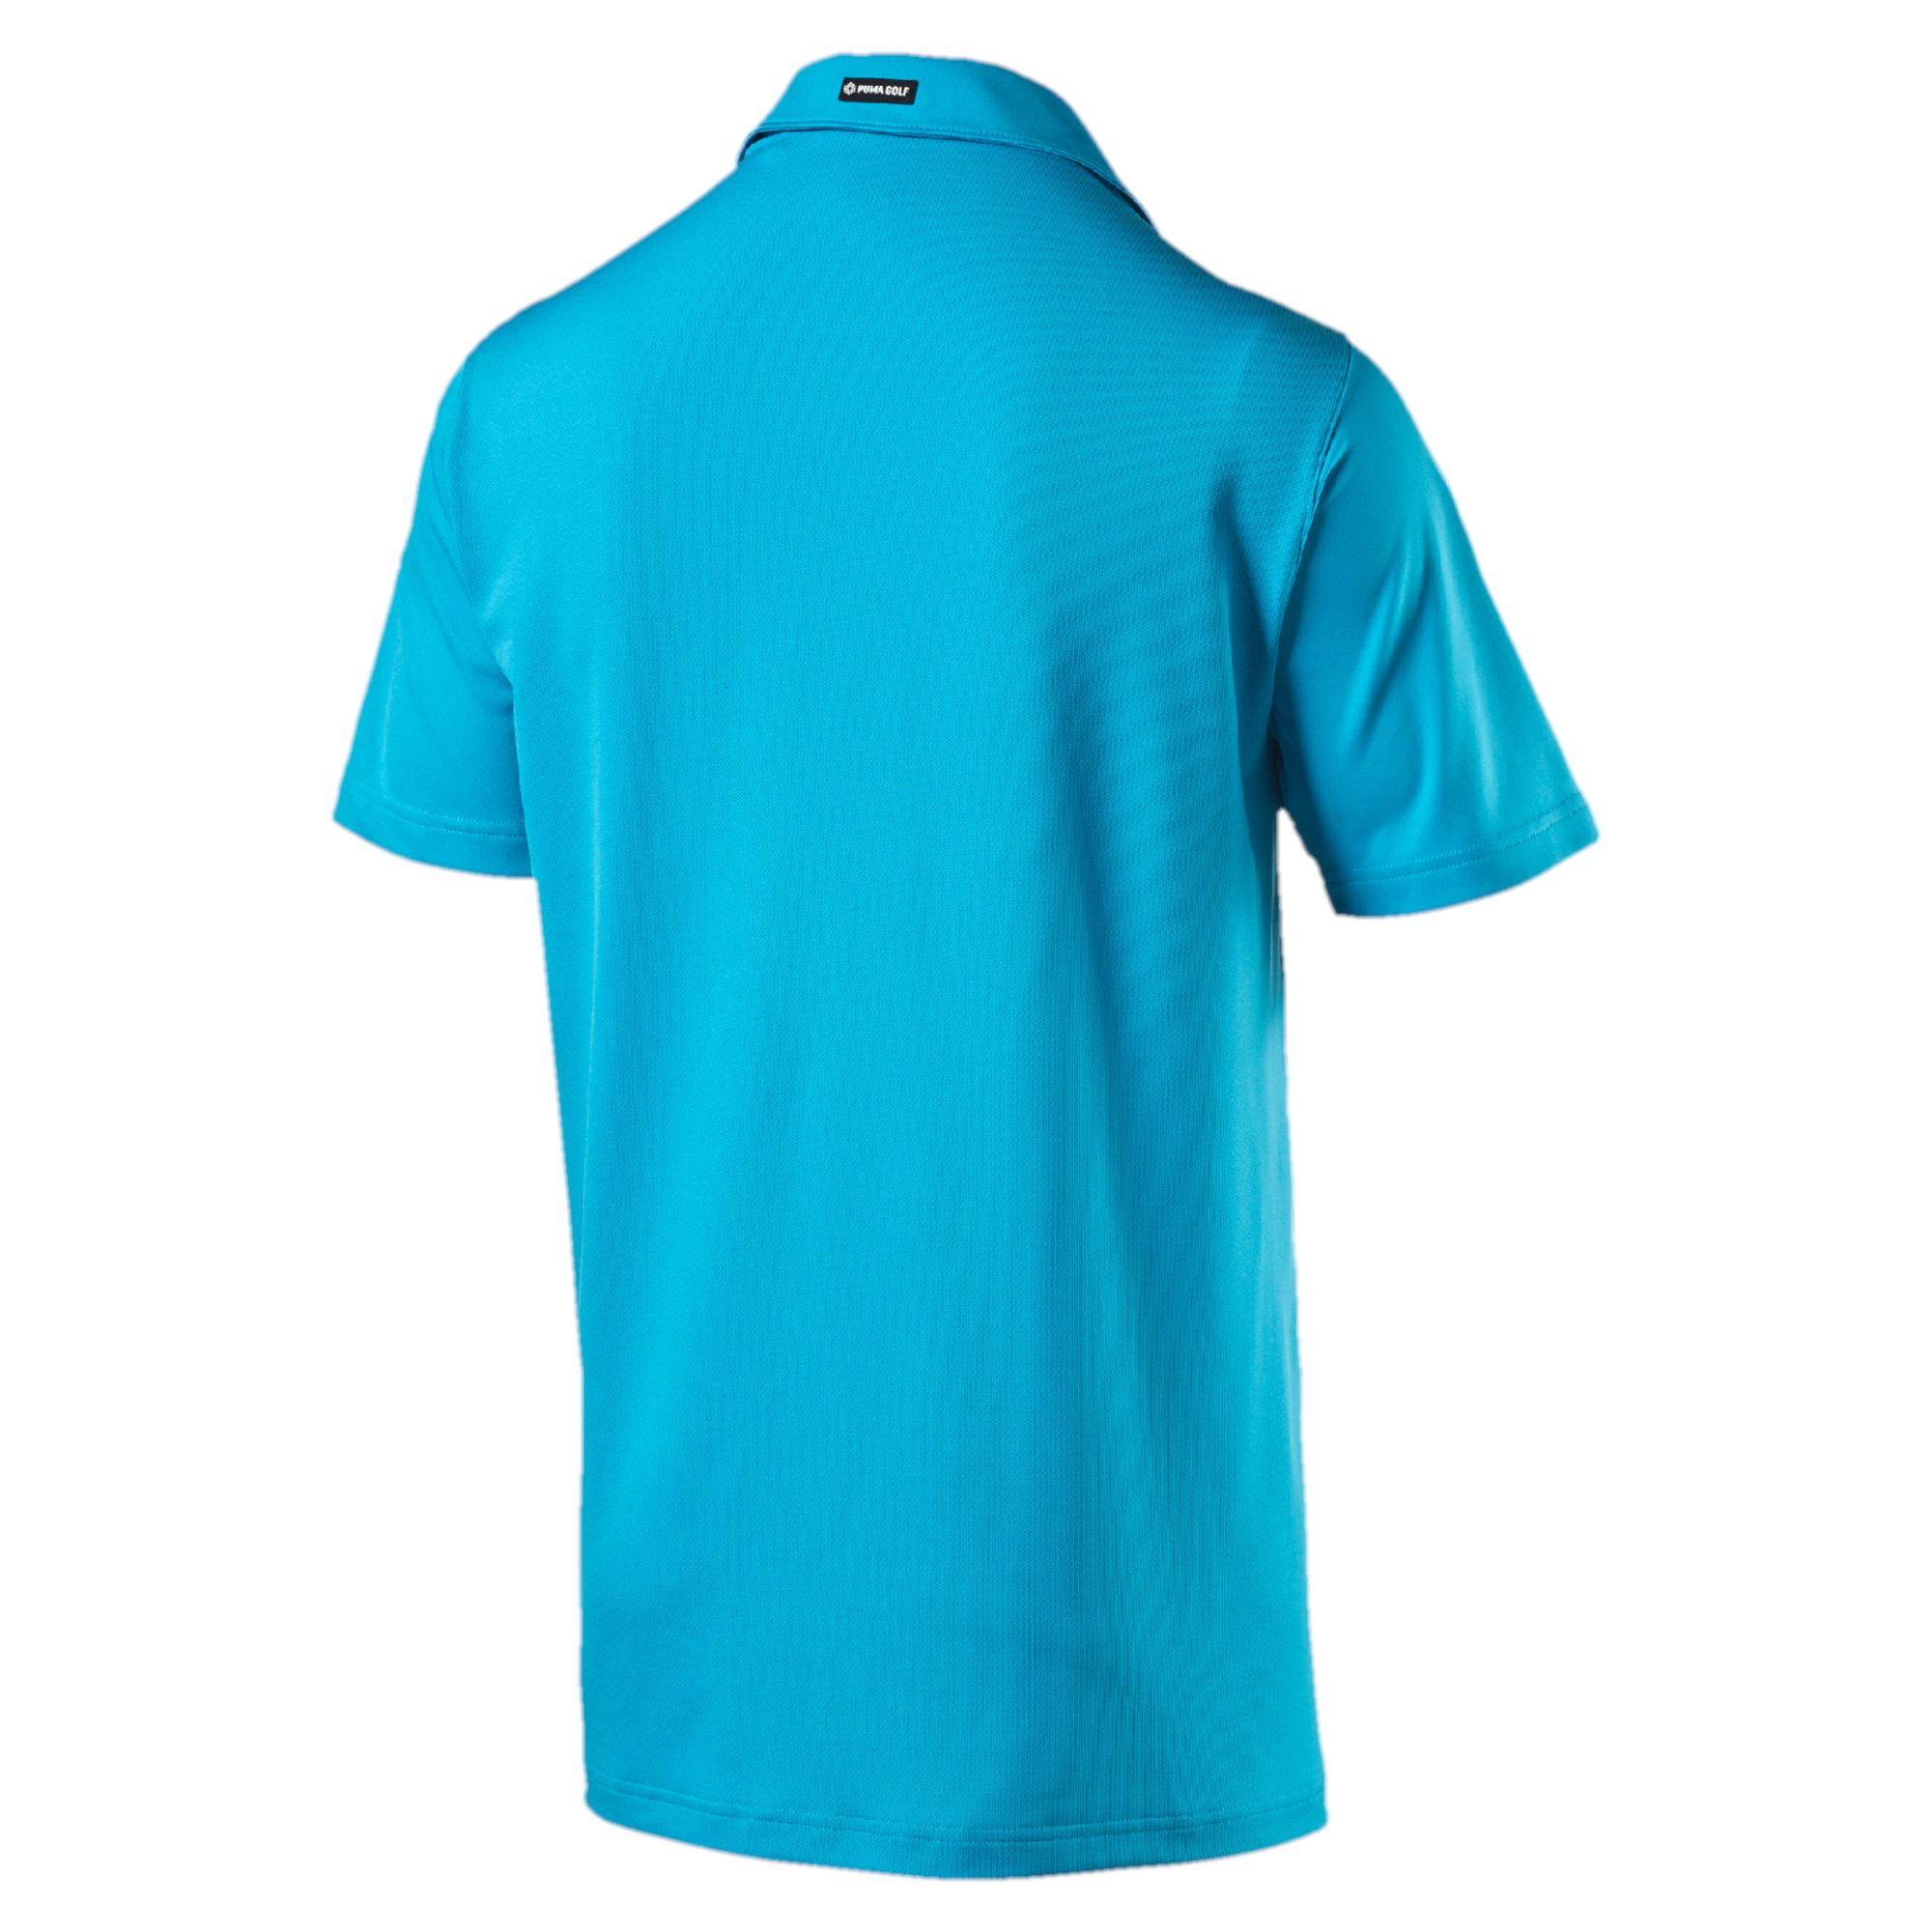 Lyst - Puma Pounce Golf Polo Shirt in Blue for Men